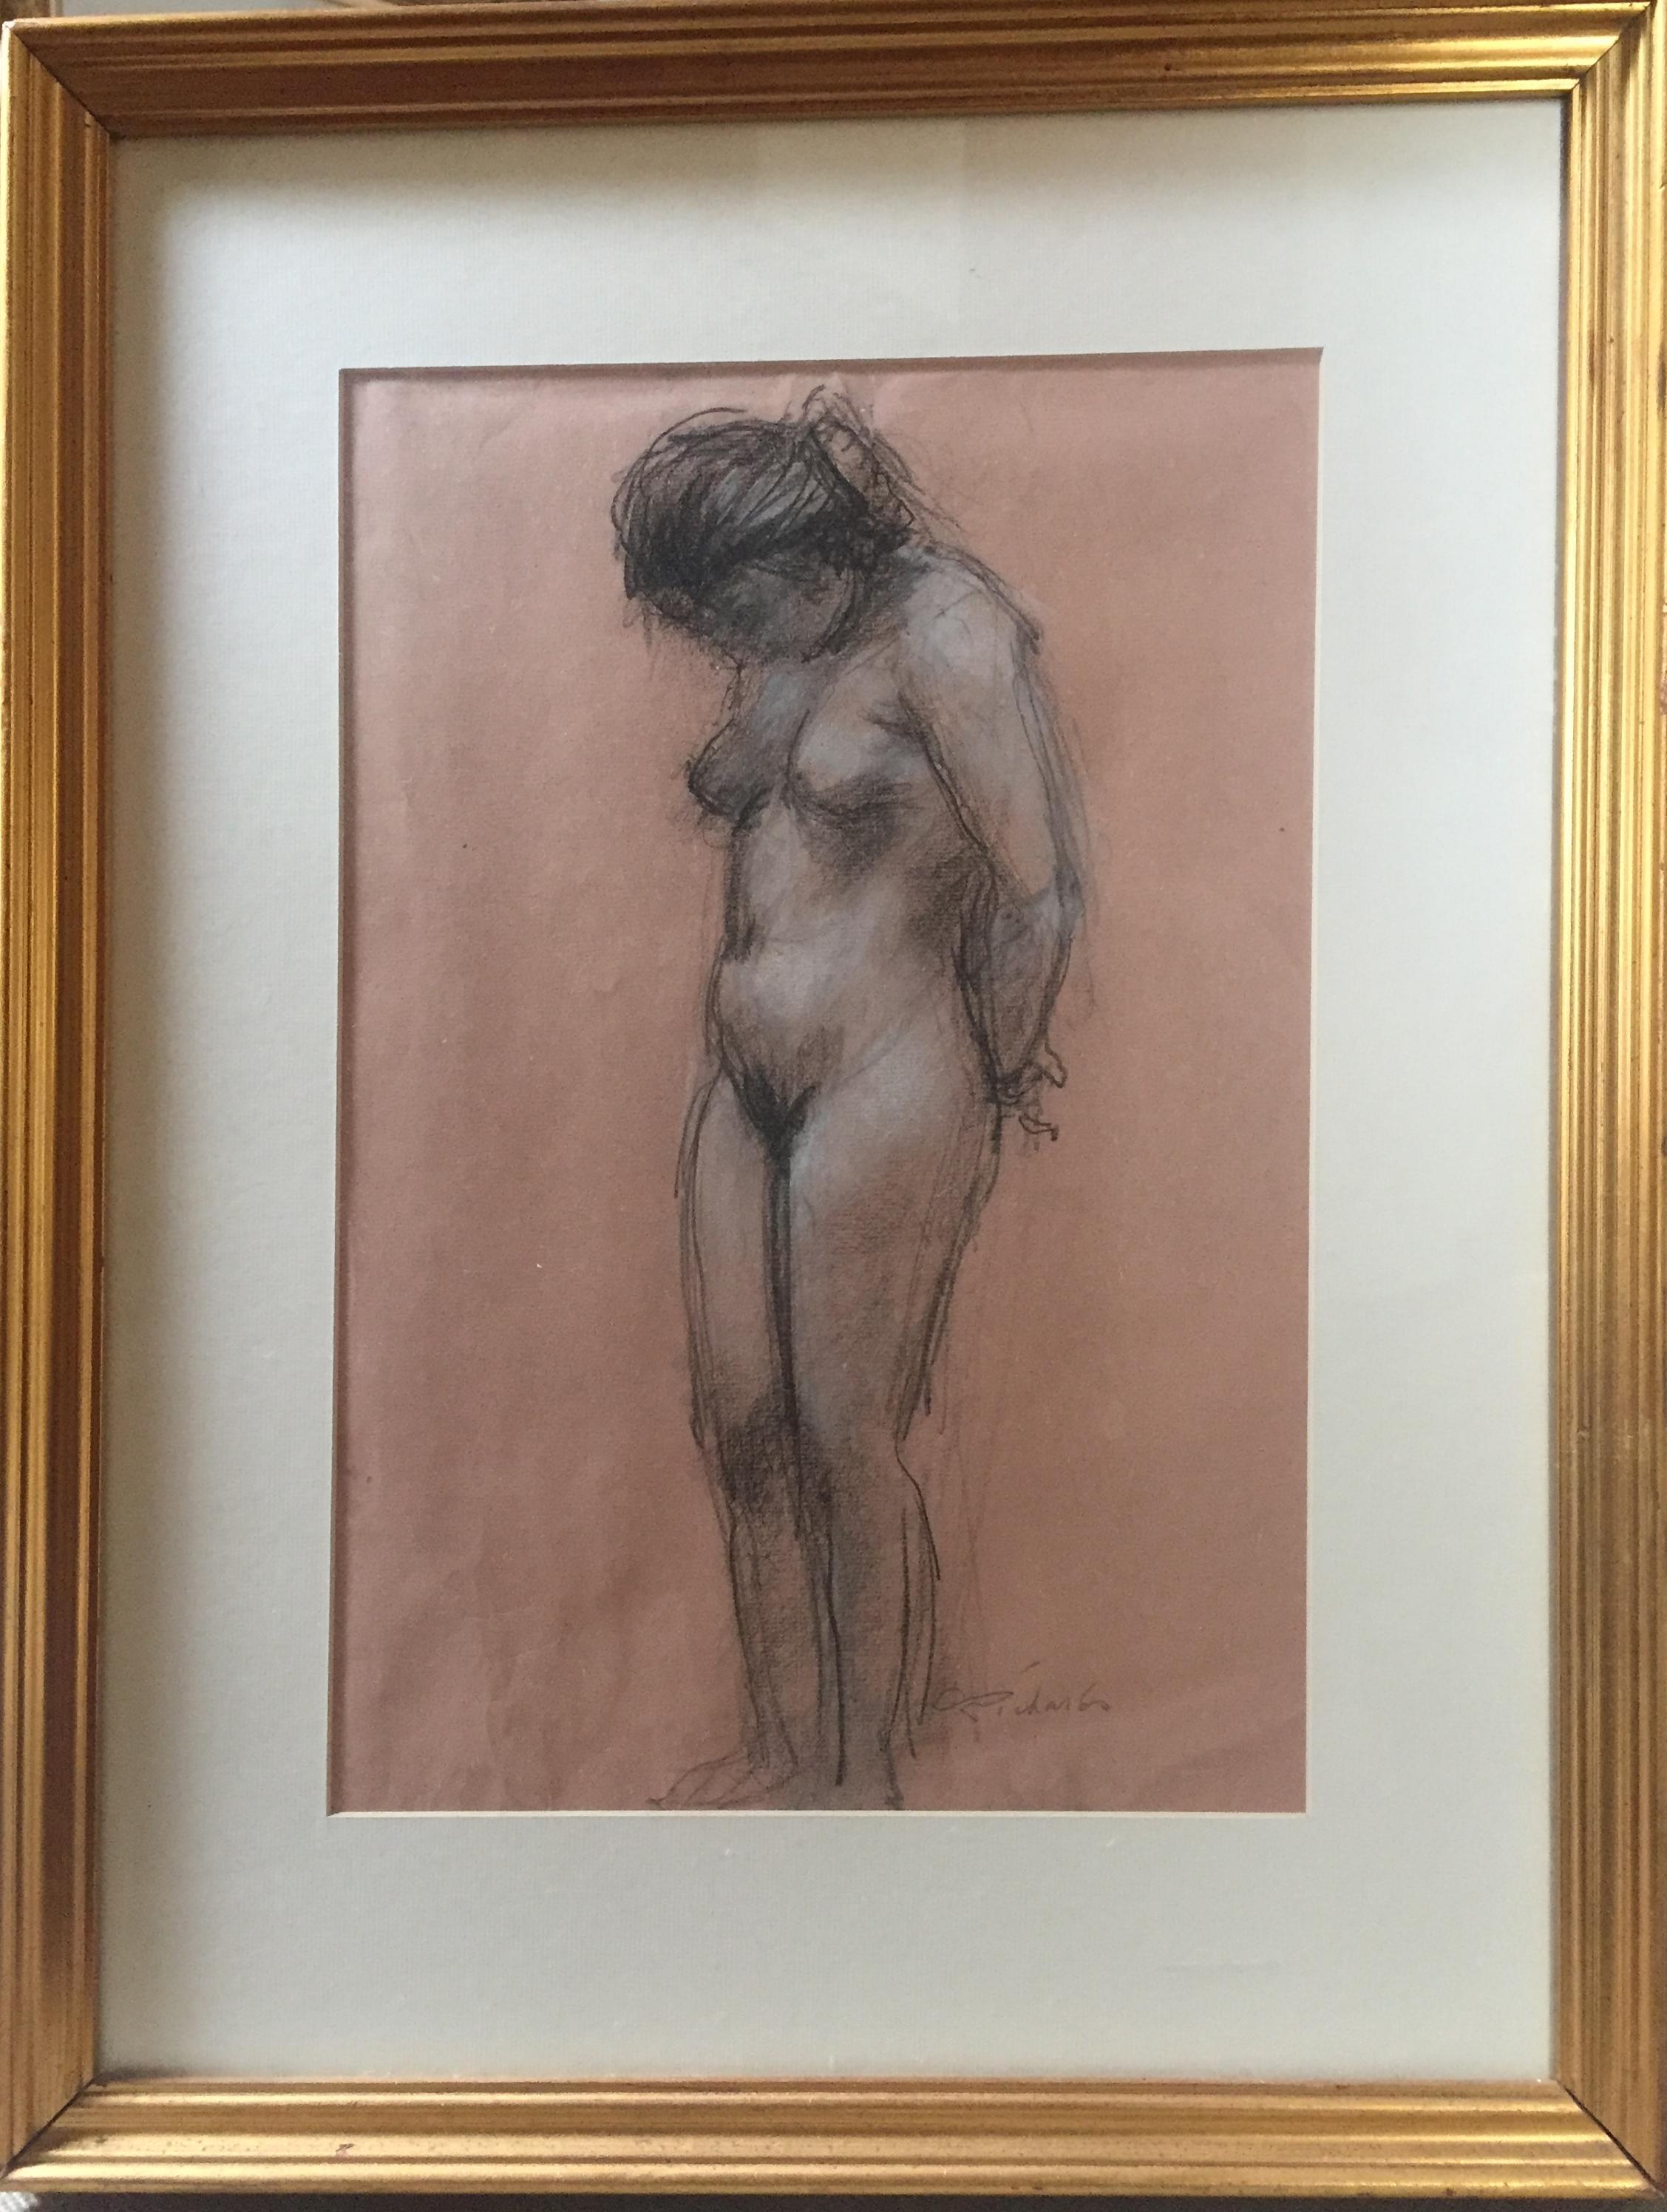 Charles Richards (New Orleans), "Standing Nude" - Framed 1900s Woman Portrait - Art by Charles Whitfield Richards